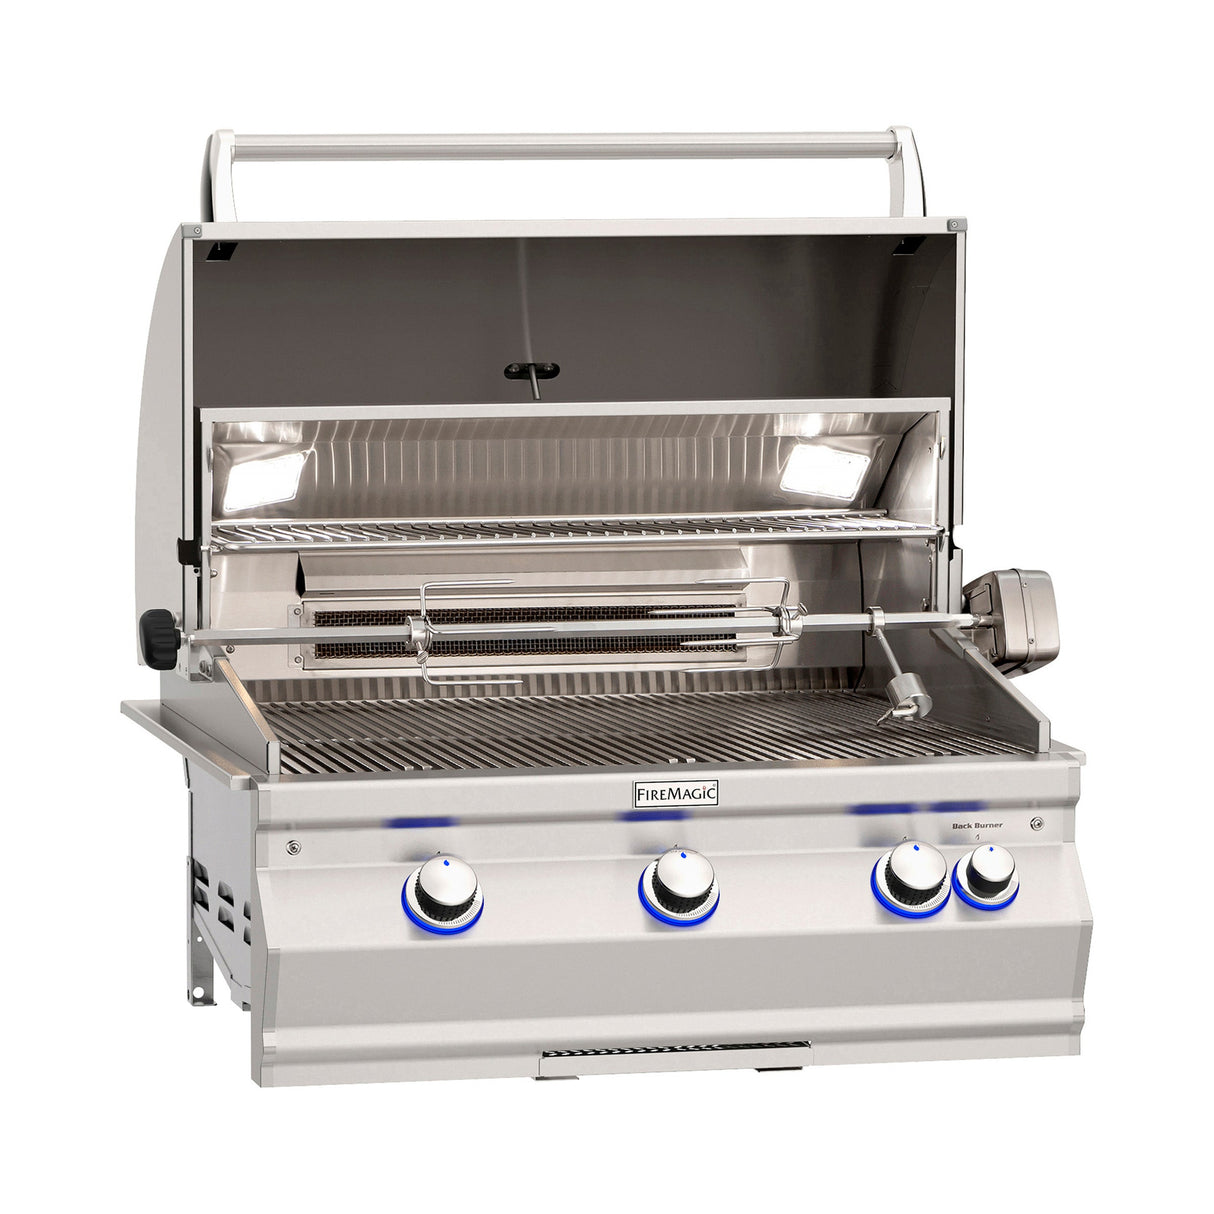 Fire Magic Aurora A660i Built-In Grill with Back Burner